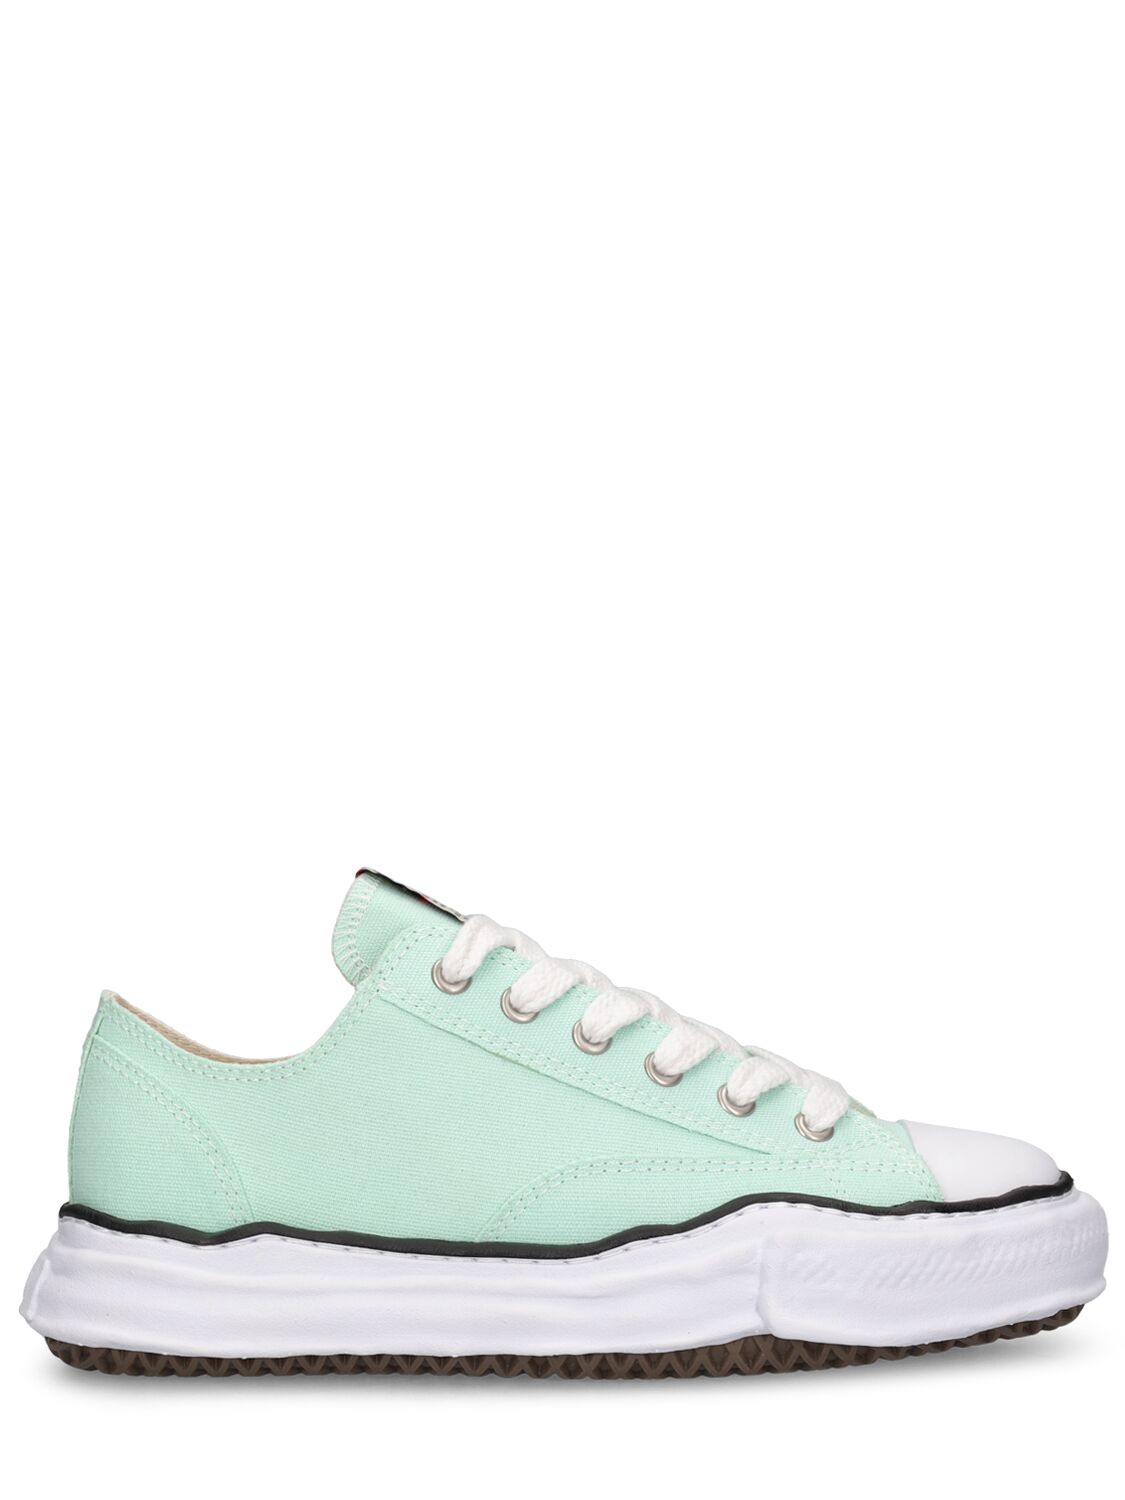 Miharayasuhiro Peterson Canvas Low Top Sneakers In Light Blue